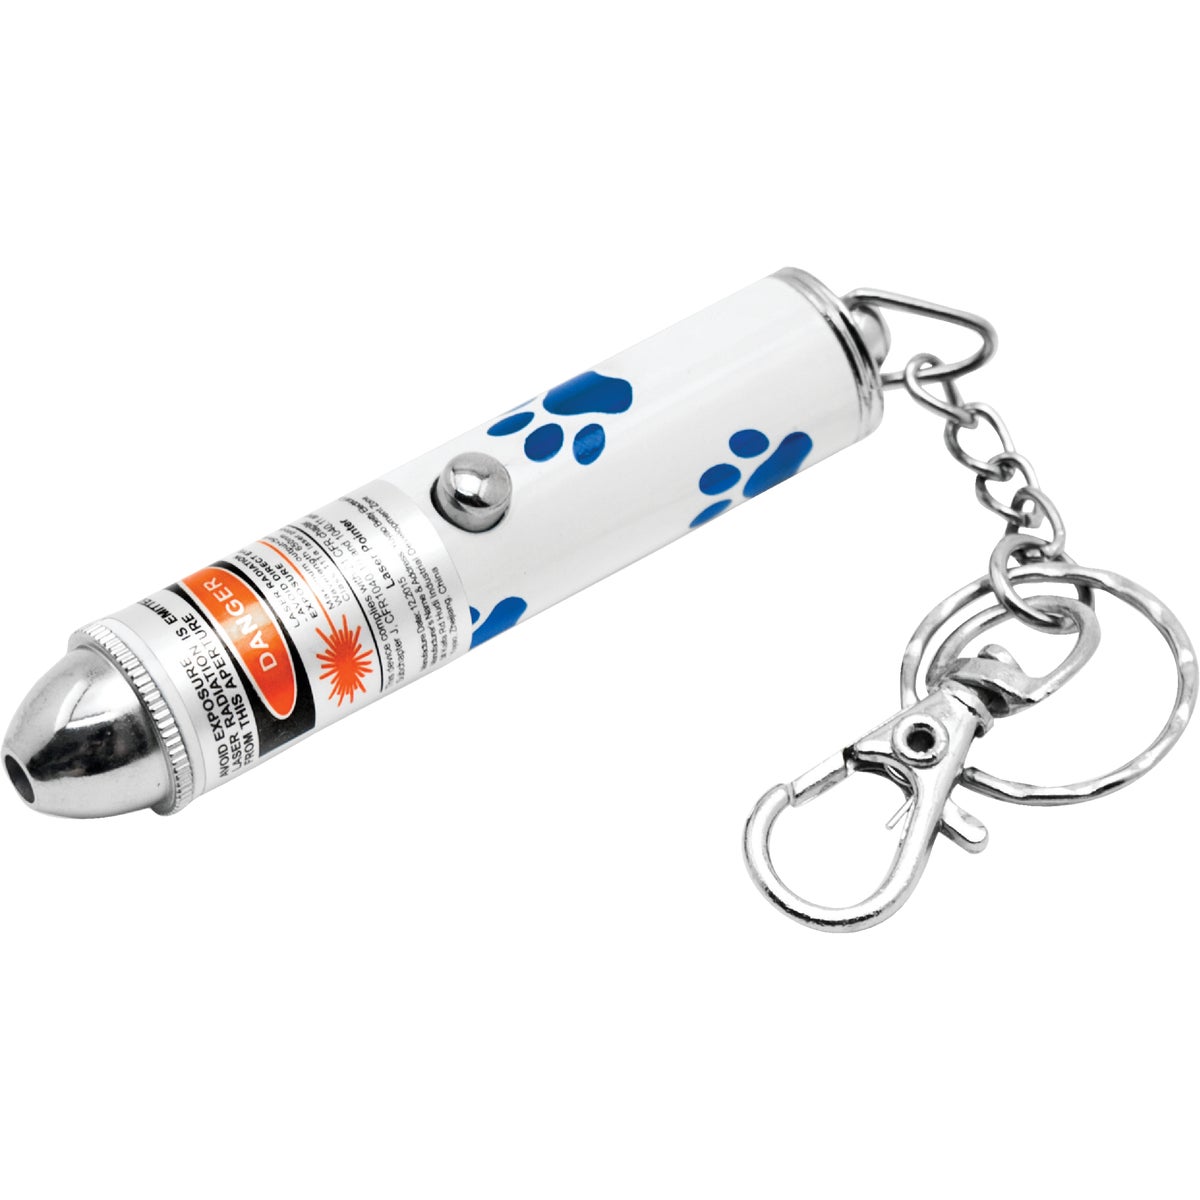 Item 809575, 5-in-1 laser toy for your pet.